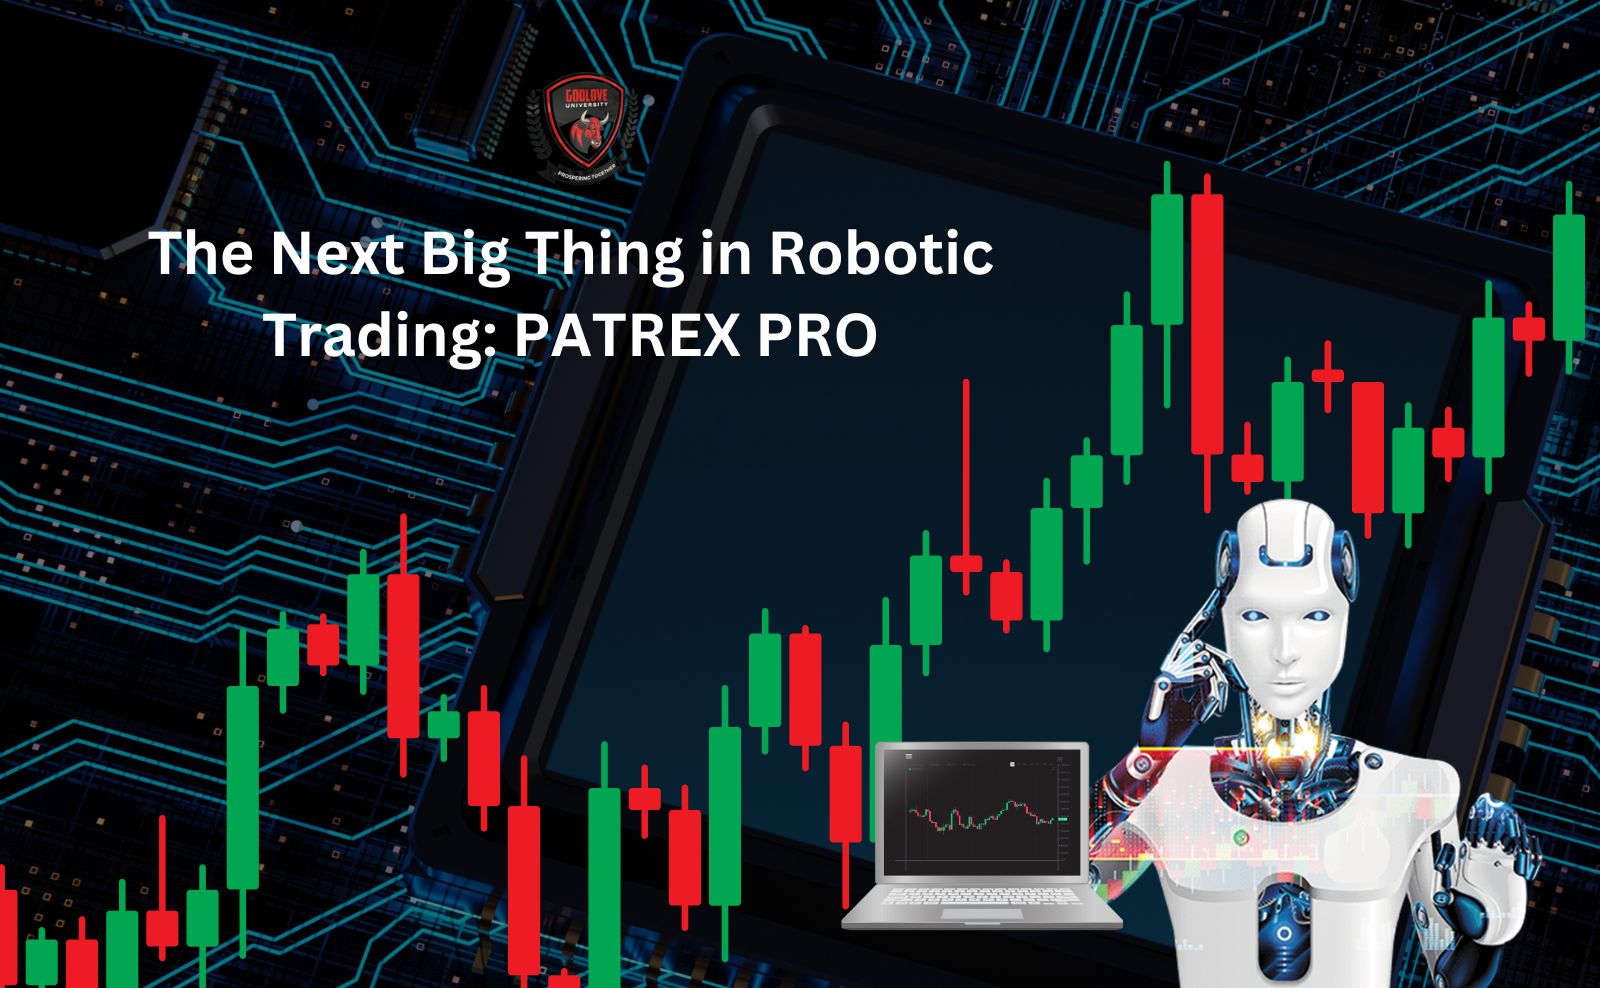 The Next Big Thing in Trading Robots Introducing PATREX PRO